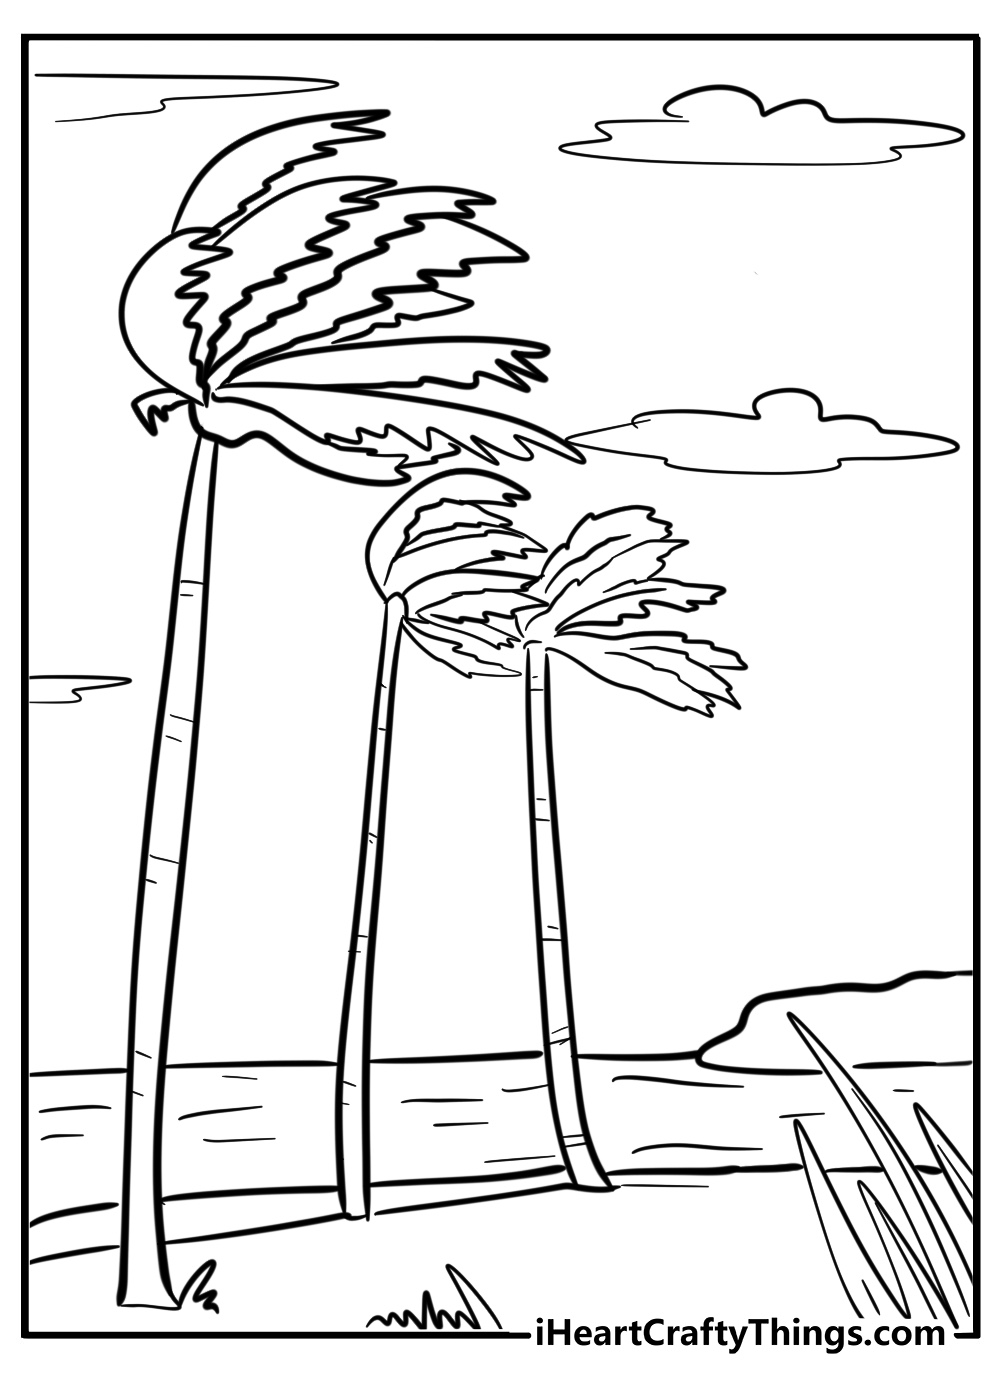 A palm tree swaying in the strong wind